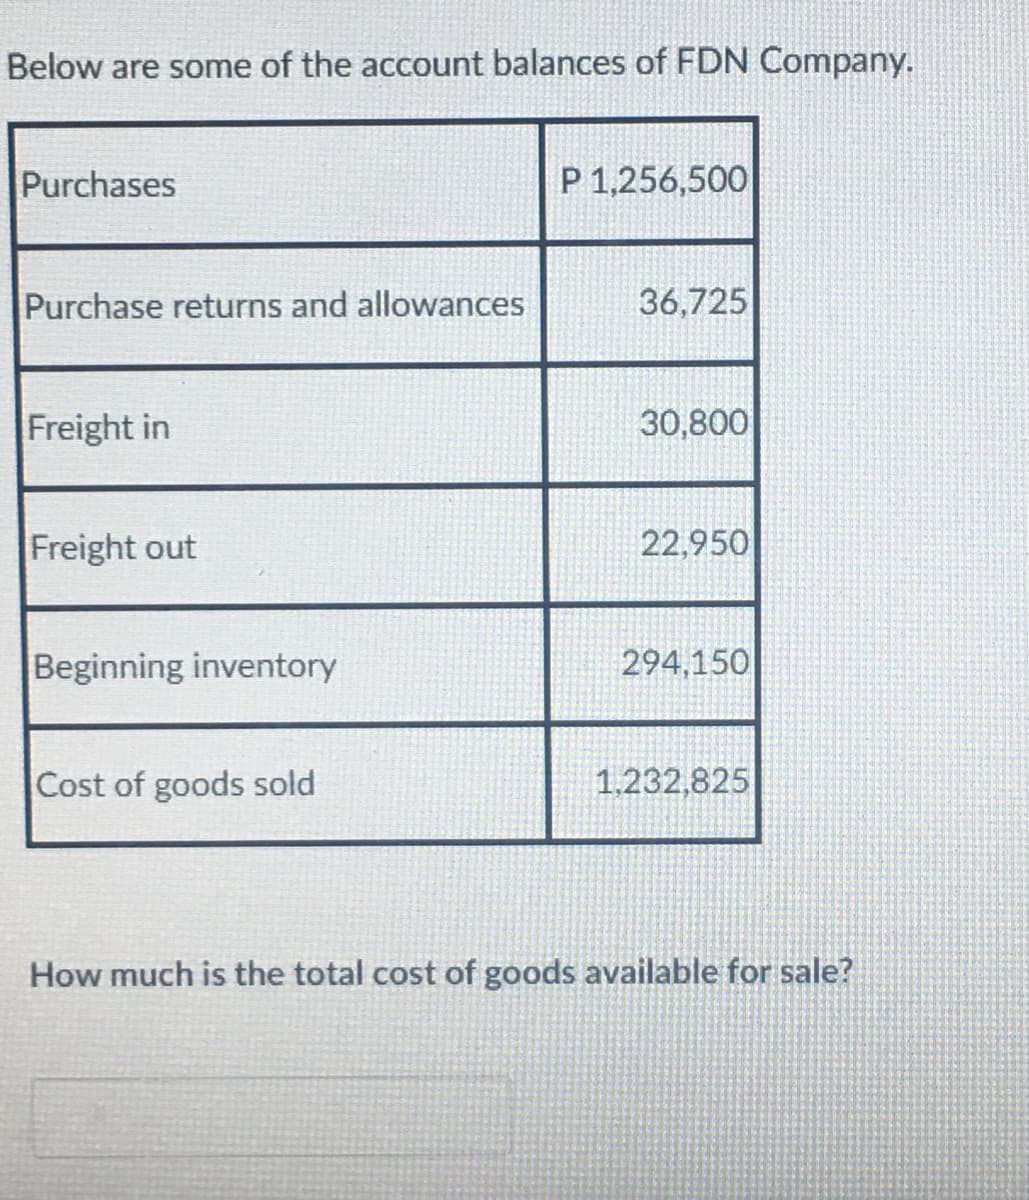 Below are some of the account balances of FDN Company.
Purchases
P 1,256,500
Purchase returns and allowances
36,725
Freight in
30,800
Freight out
22,950
Beginning inventory
294,150
Cost of goods sold
1,232,825
How much is the total cost of goods available for sale?
